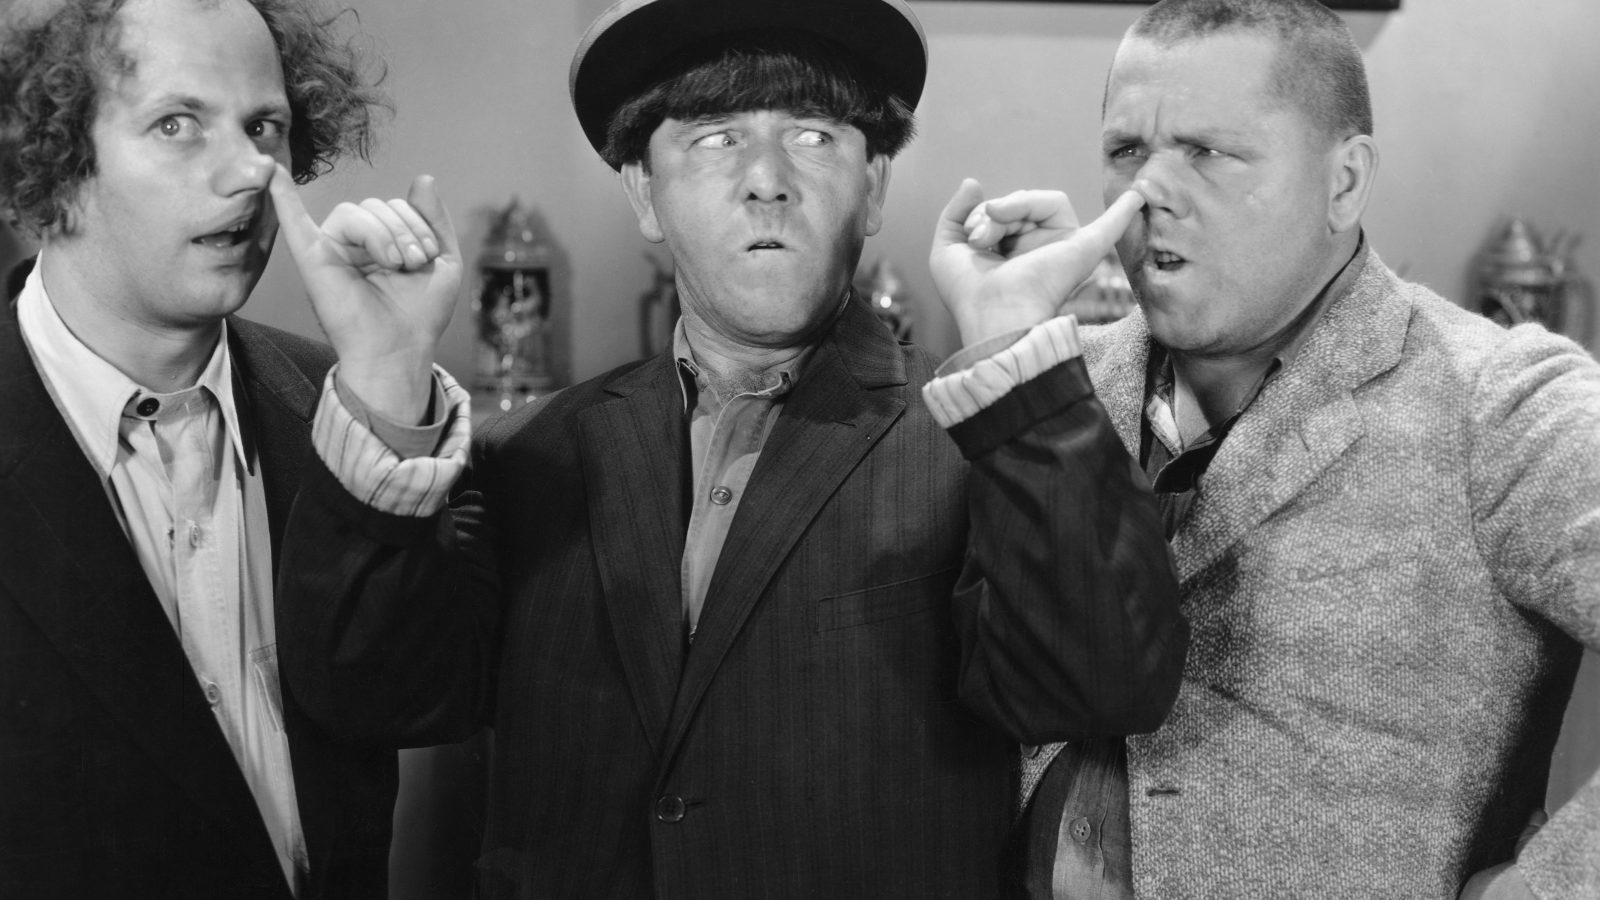 If You Know 15/20 of These Classic TV Shows, Then You Must’ve Owned a Black and White TV The Three Stooges